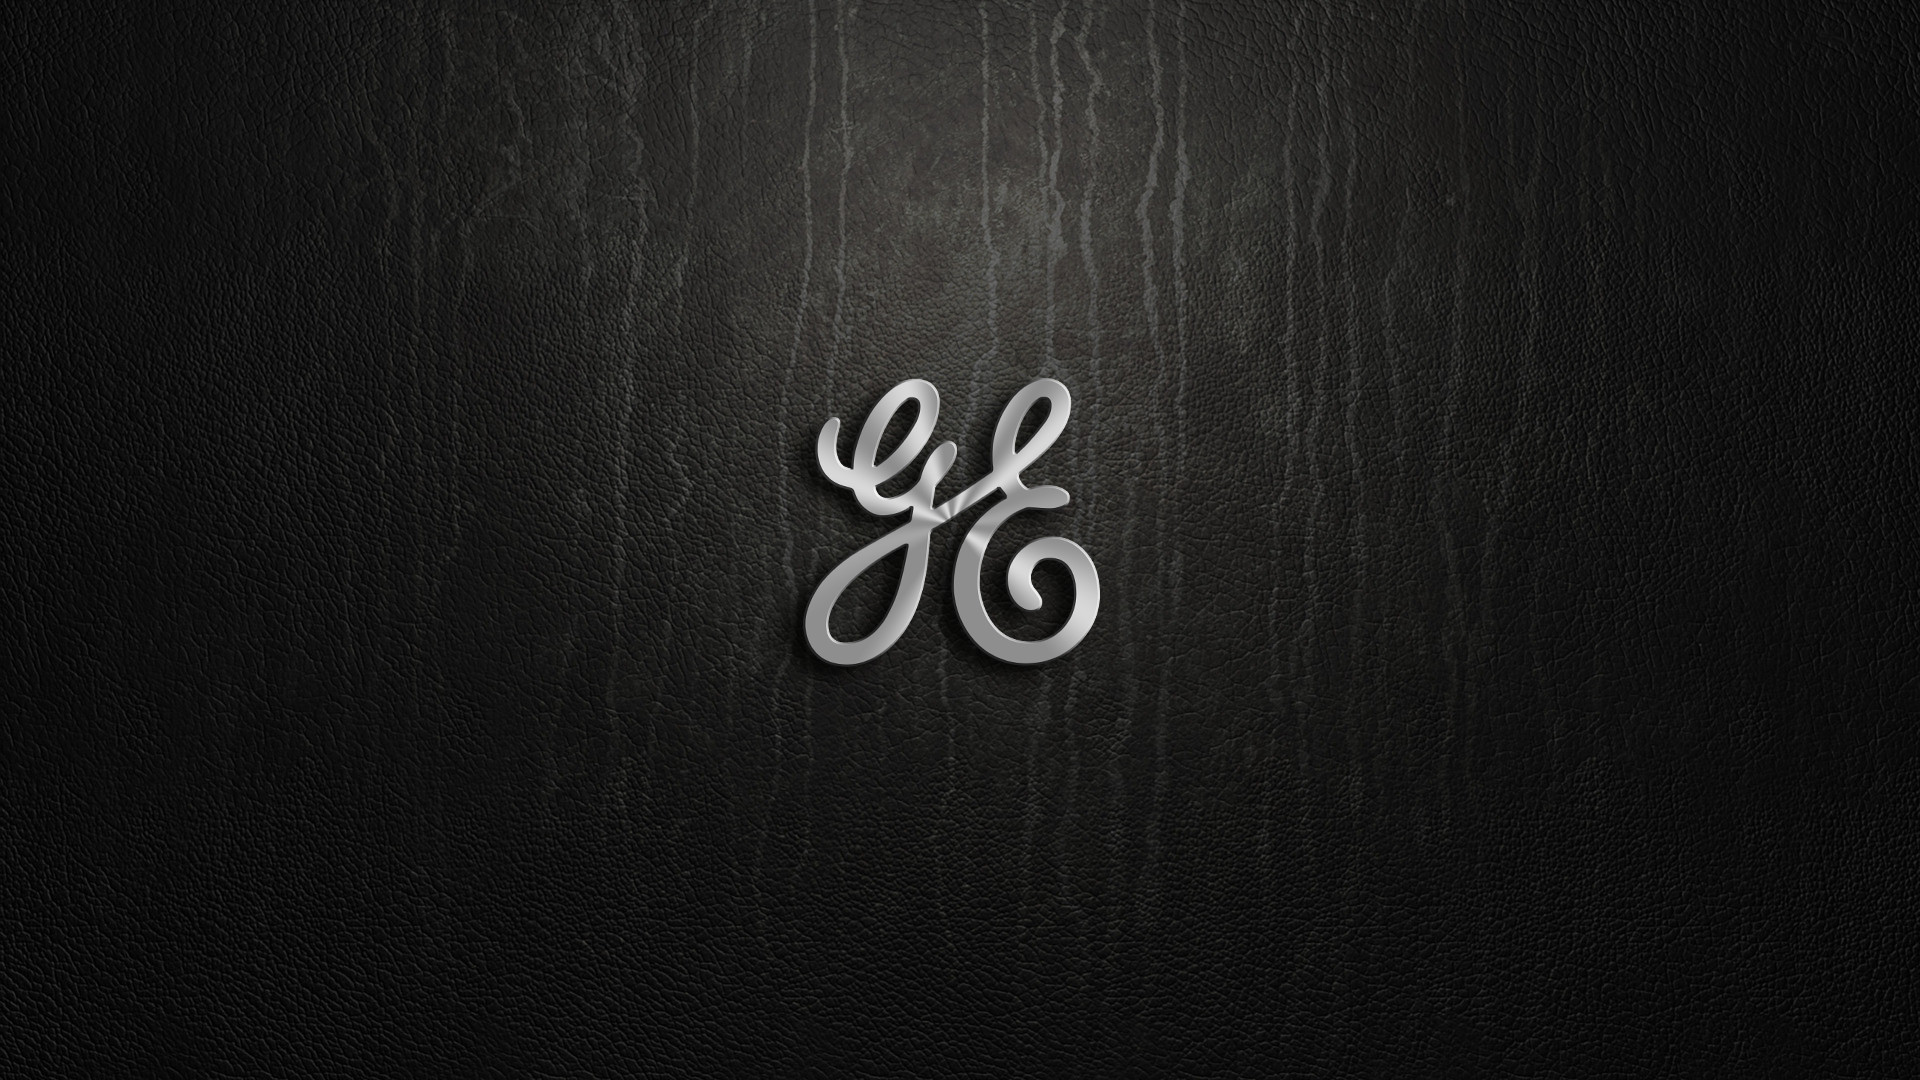 1920x1080 Excellent Ge Logo Wallpaper | Full HD Pictures